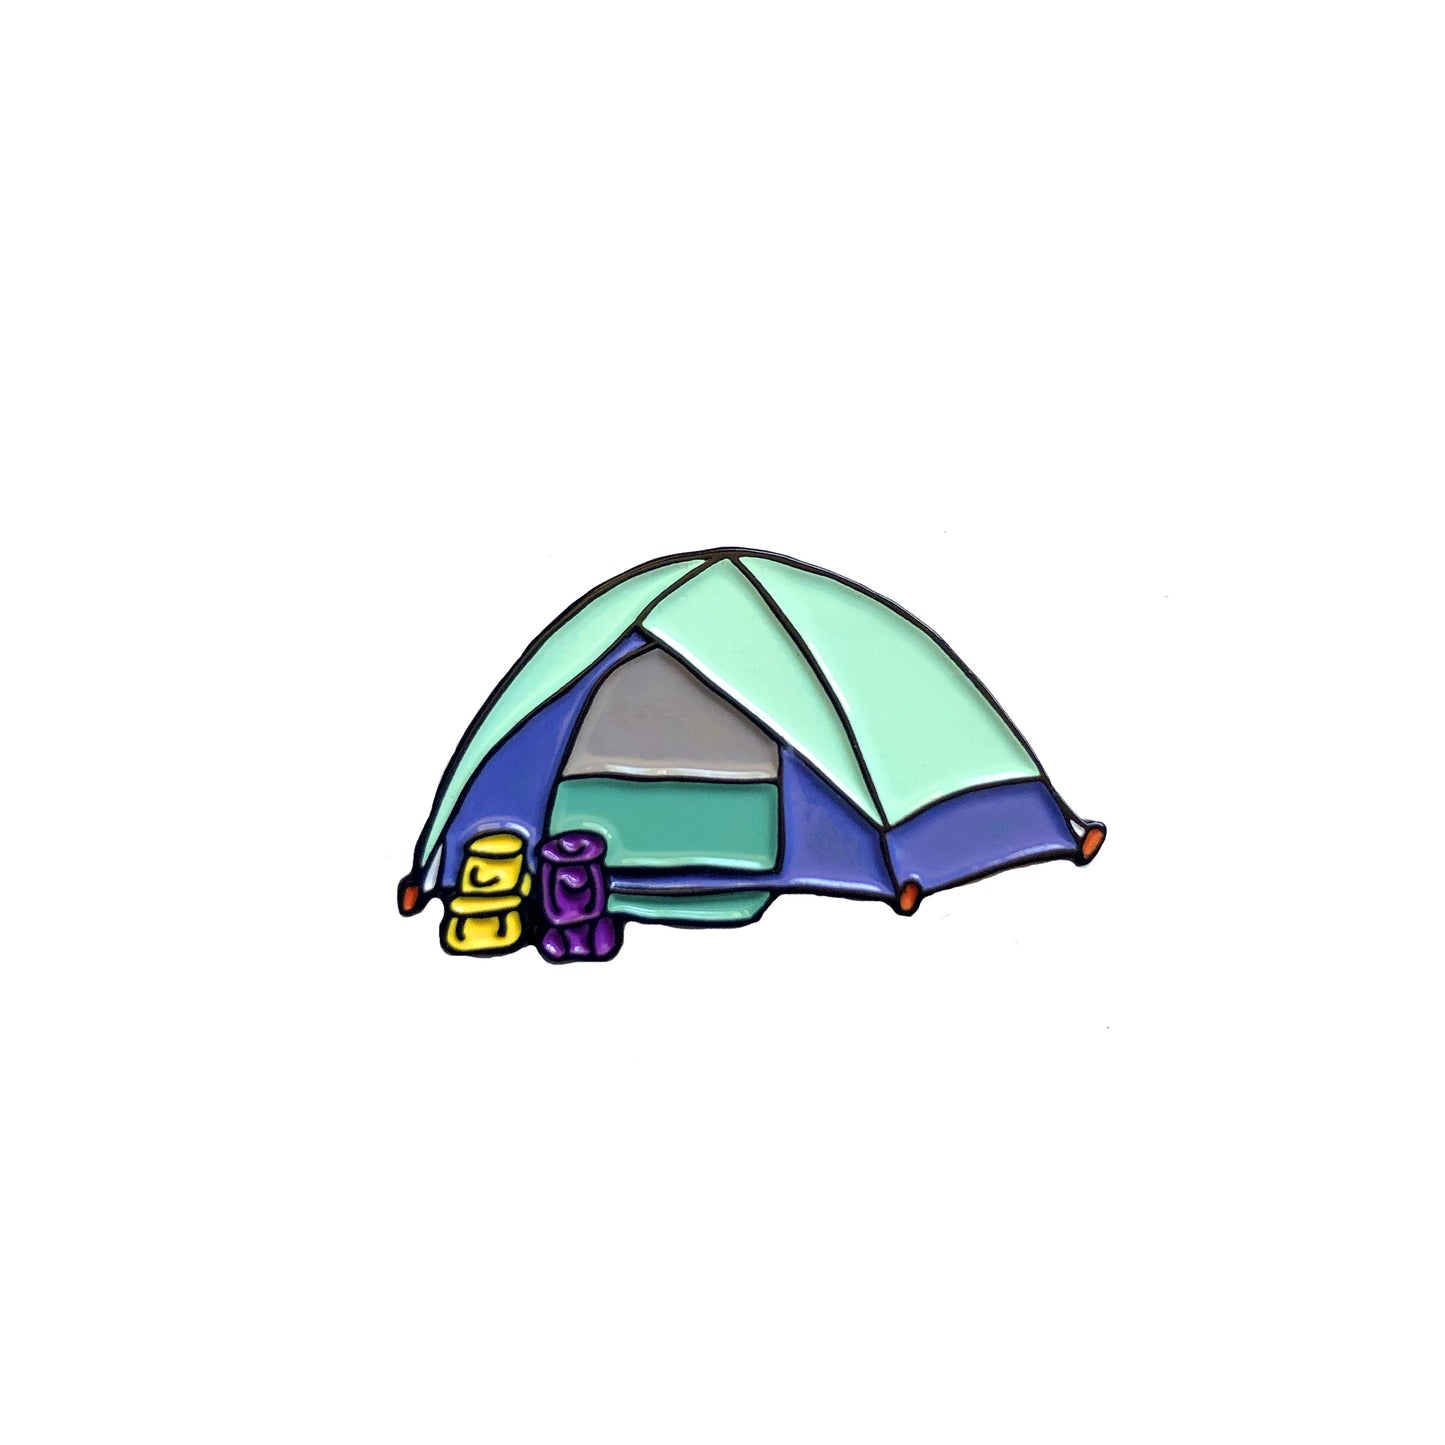 Camping pin in the shape of a cute tent